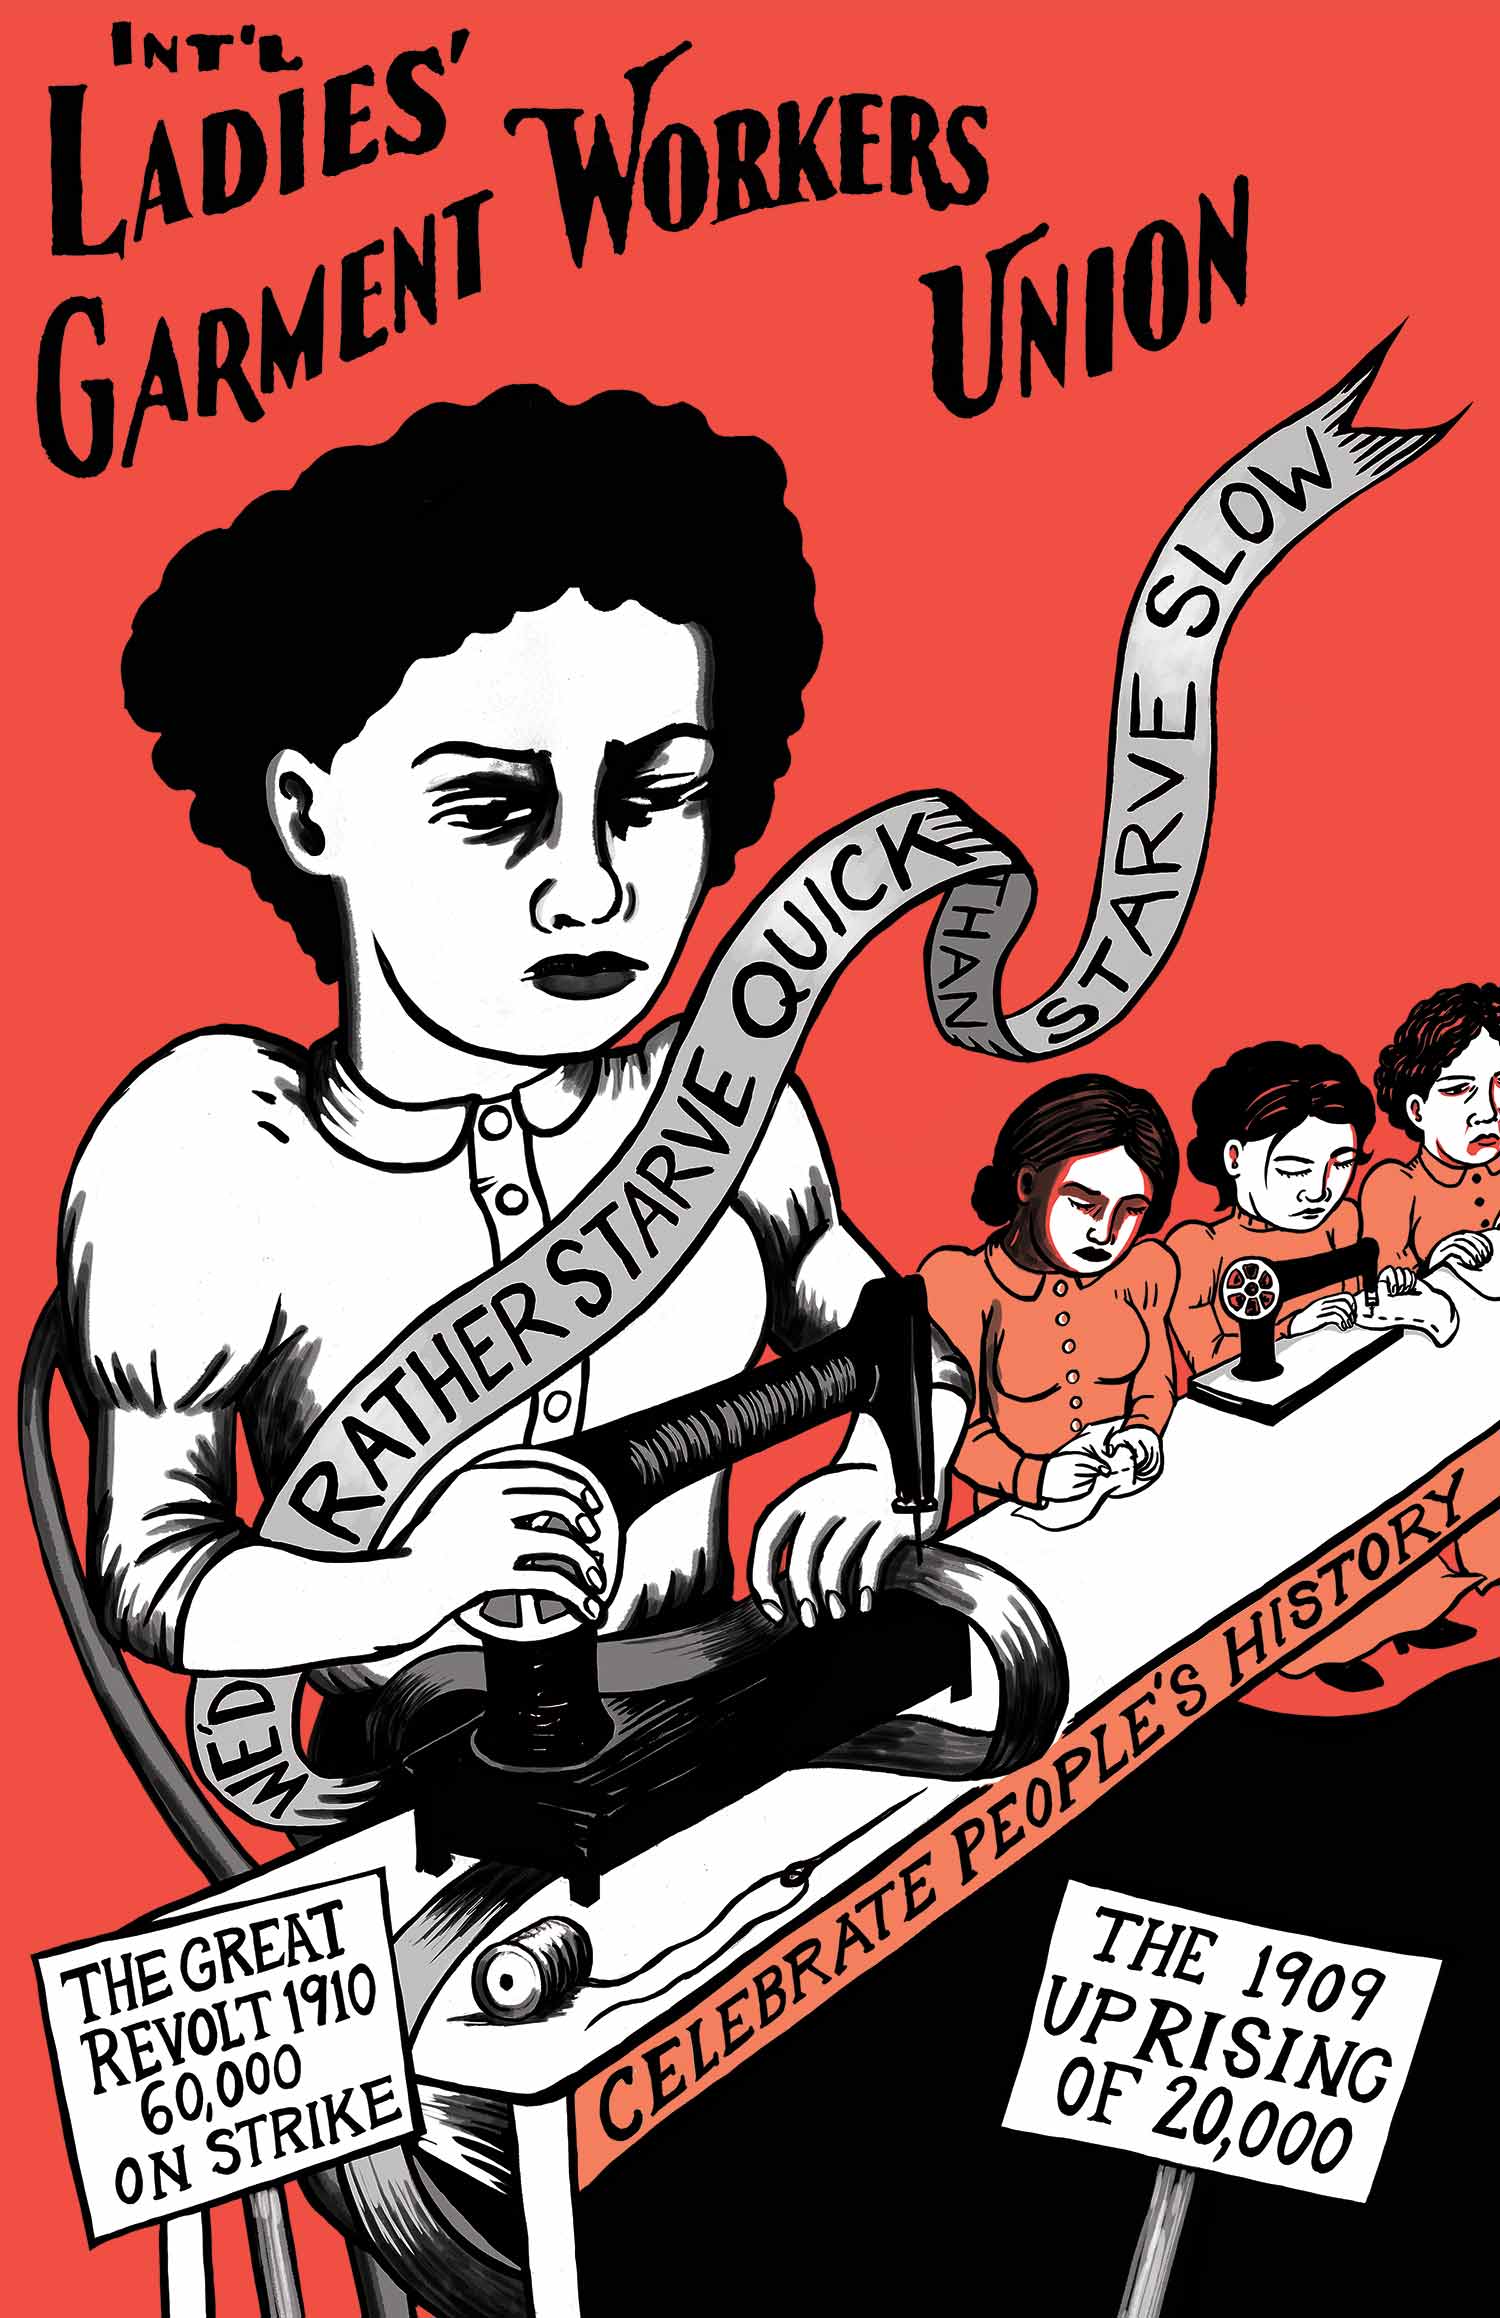 Justseeds | Int'l Ladies' Garment Workers Union